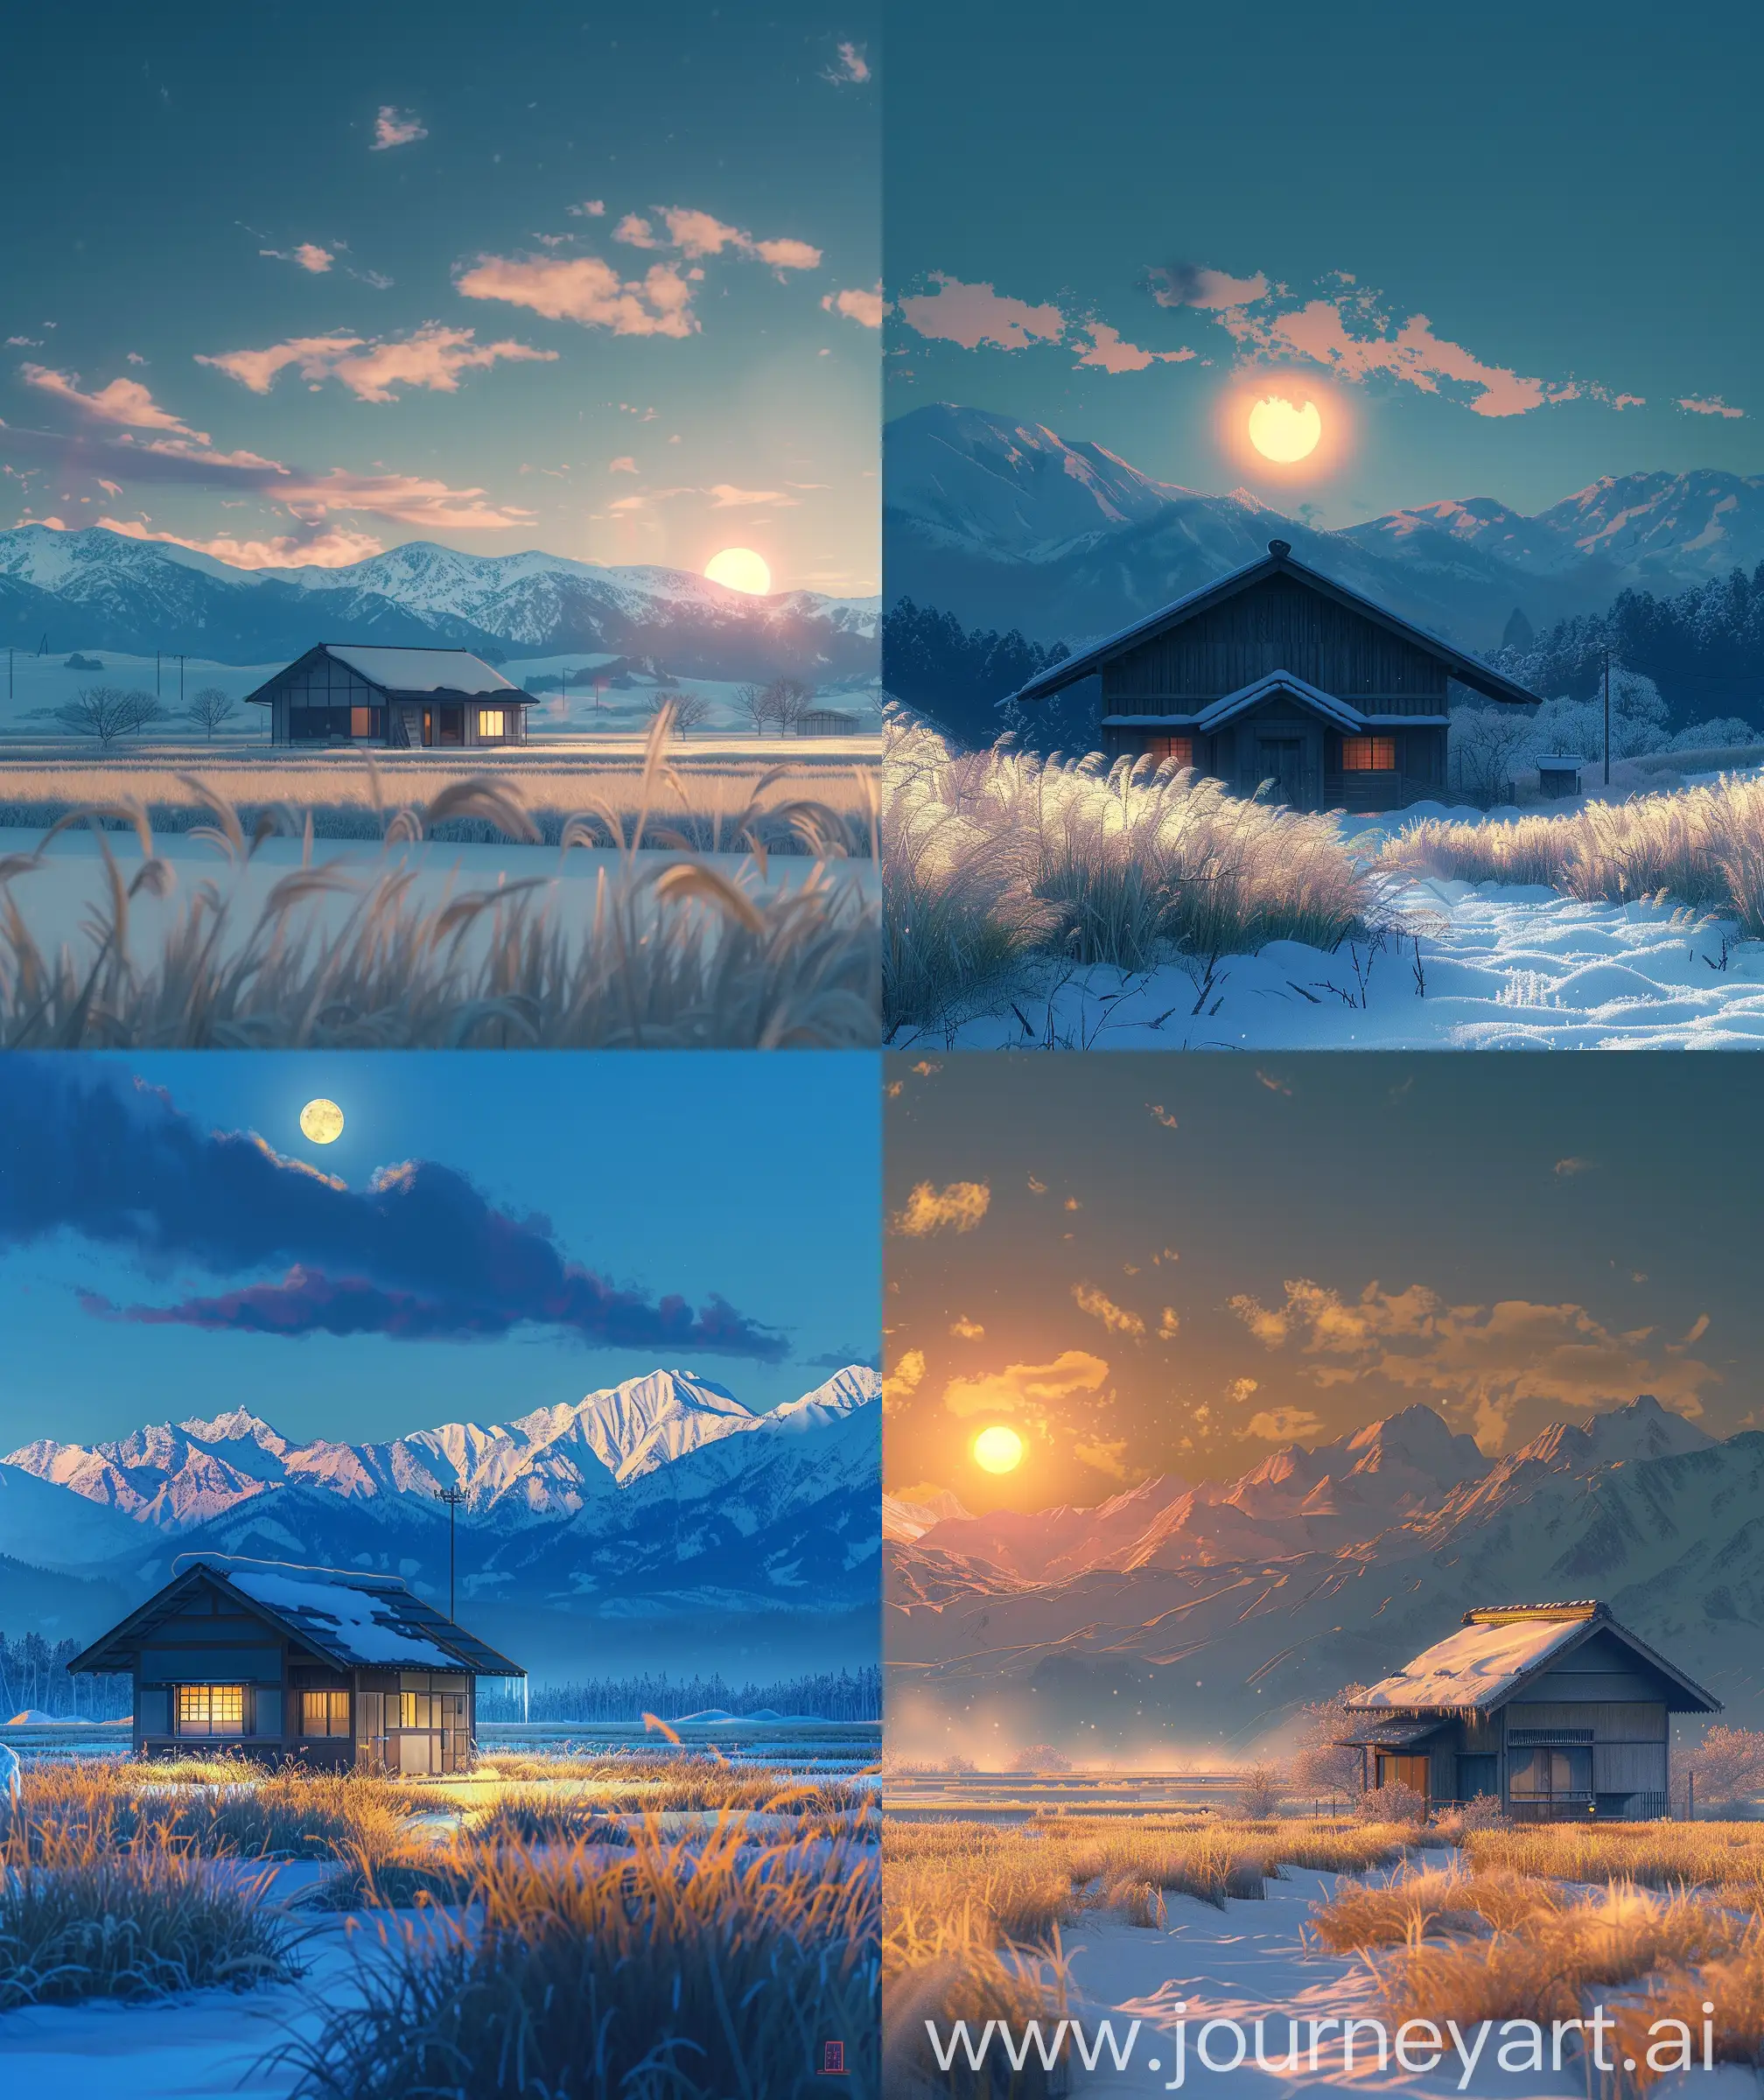 Anime scenary,evening time, sun , illustration,front facade view of small house,snowy mountains background, spring touch, serenity, cool tone, illustration, beautiful scenary, Ultra hd, grassland, anine scenary, mokoto shinkai style, no blurry image, no hyperrealistic --ar 27:32